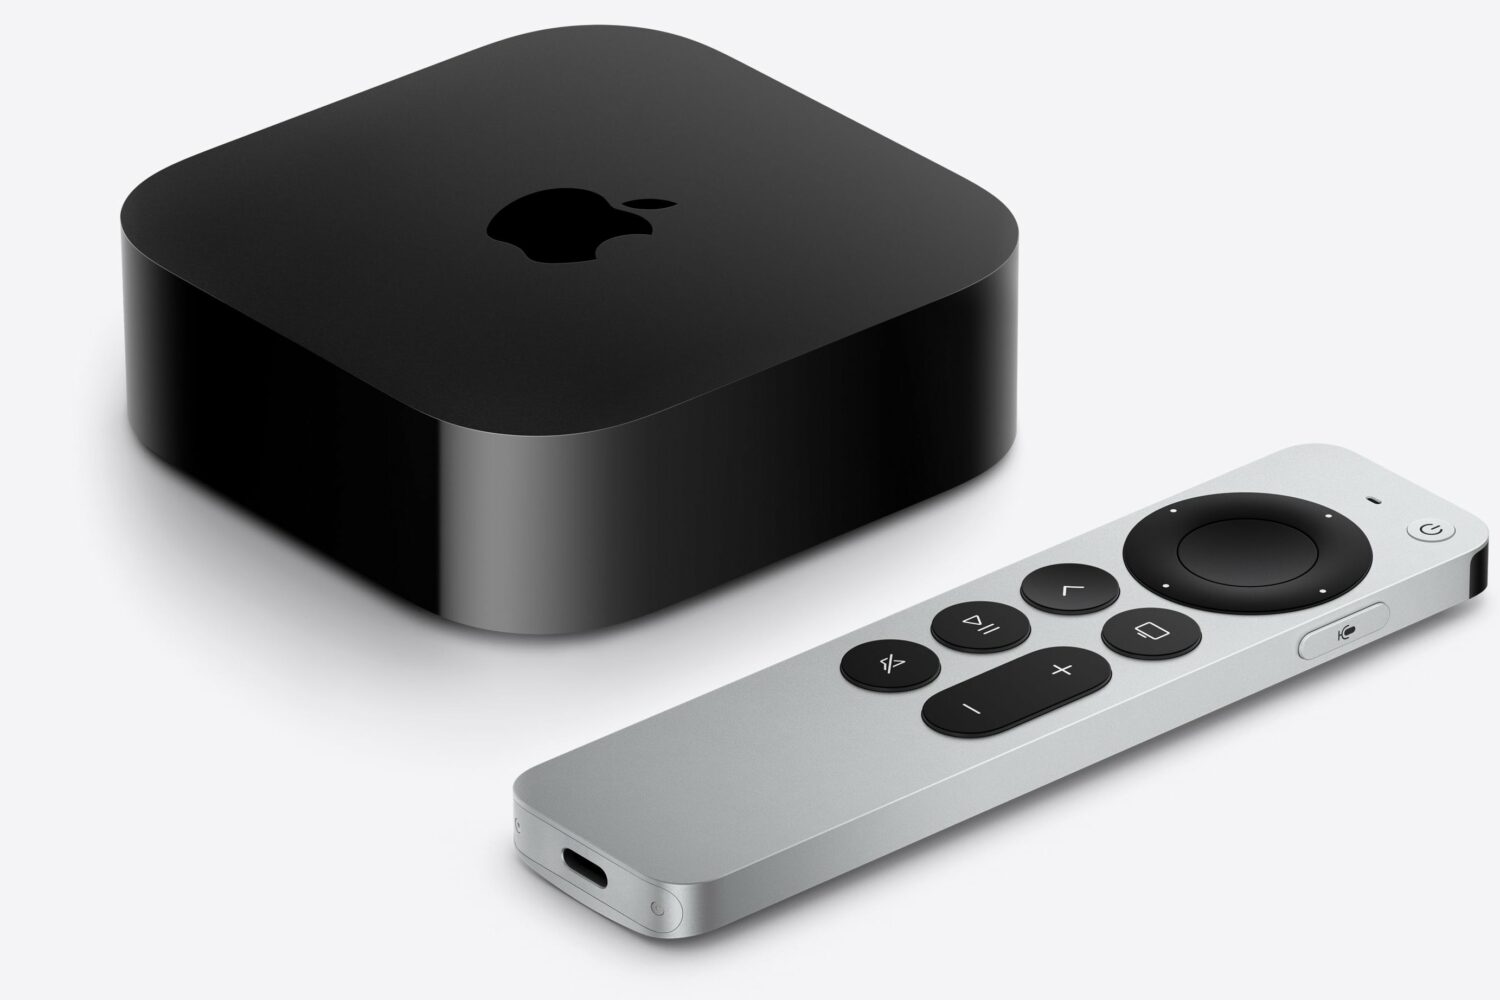 Perspective view of the third-generation Apple TV 4K with its Siri Remote